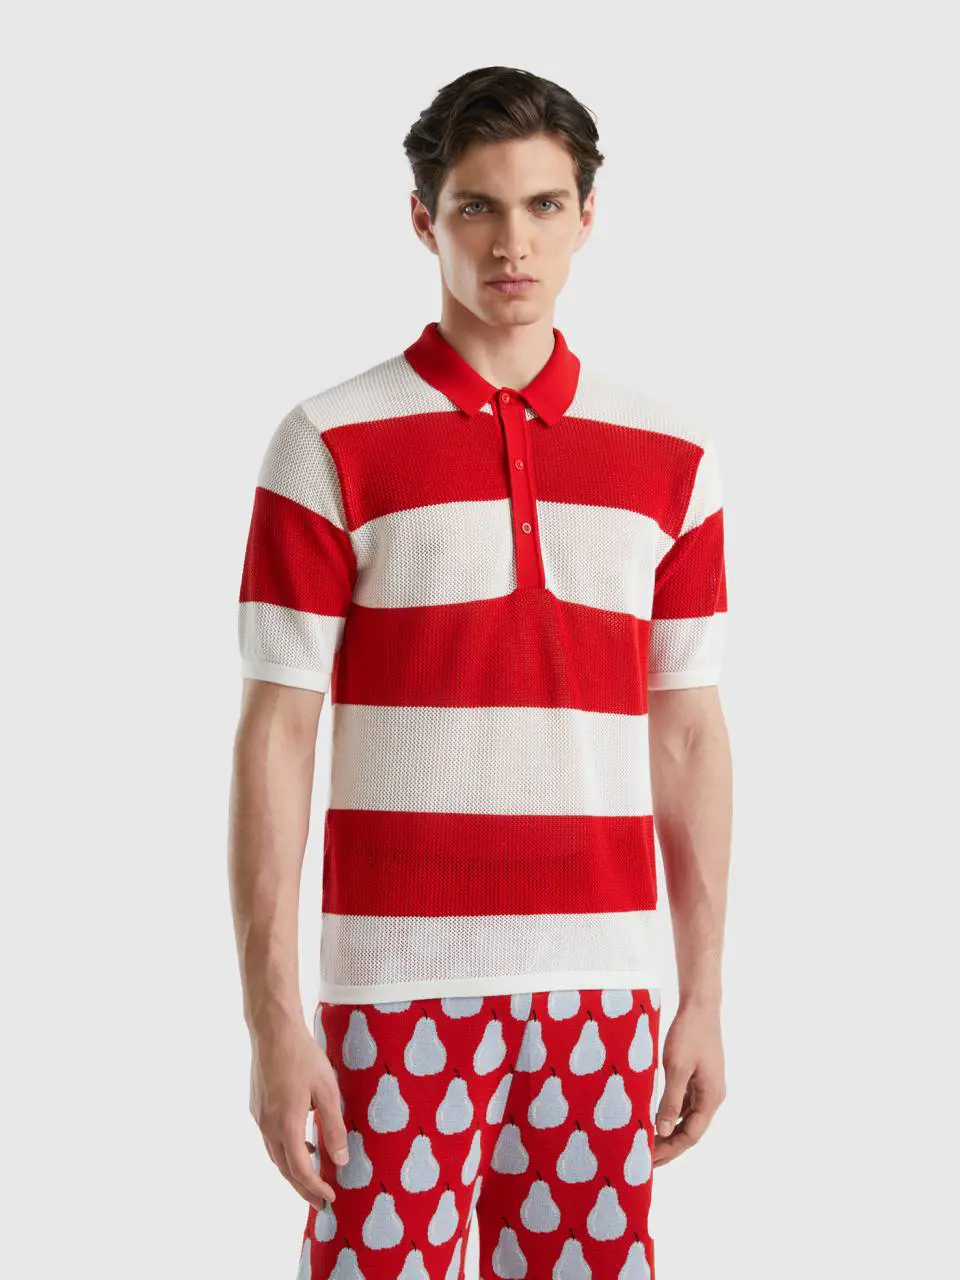 Benetton red and white striped knit polo. 1